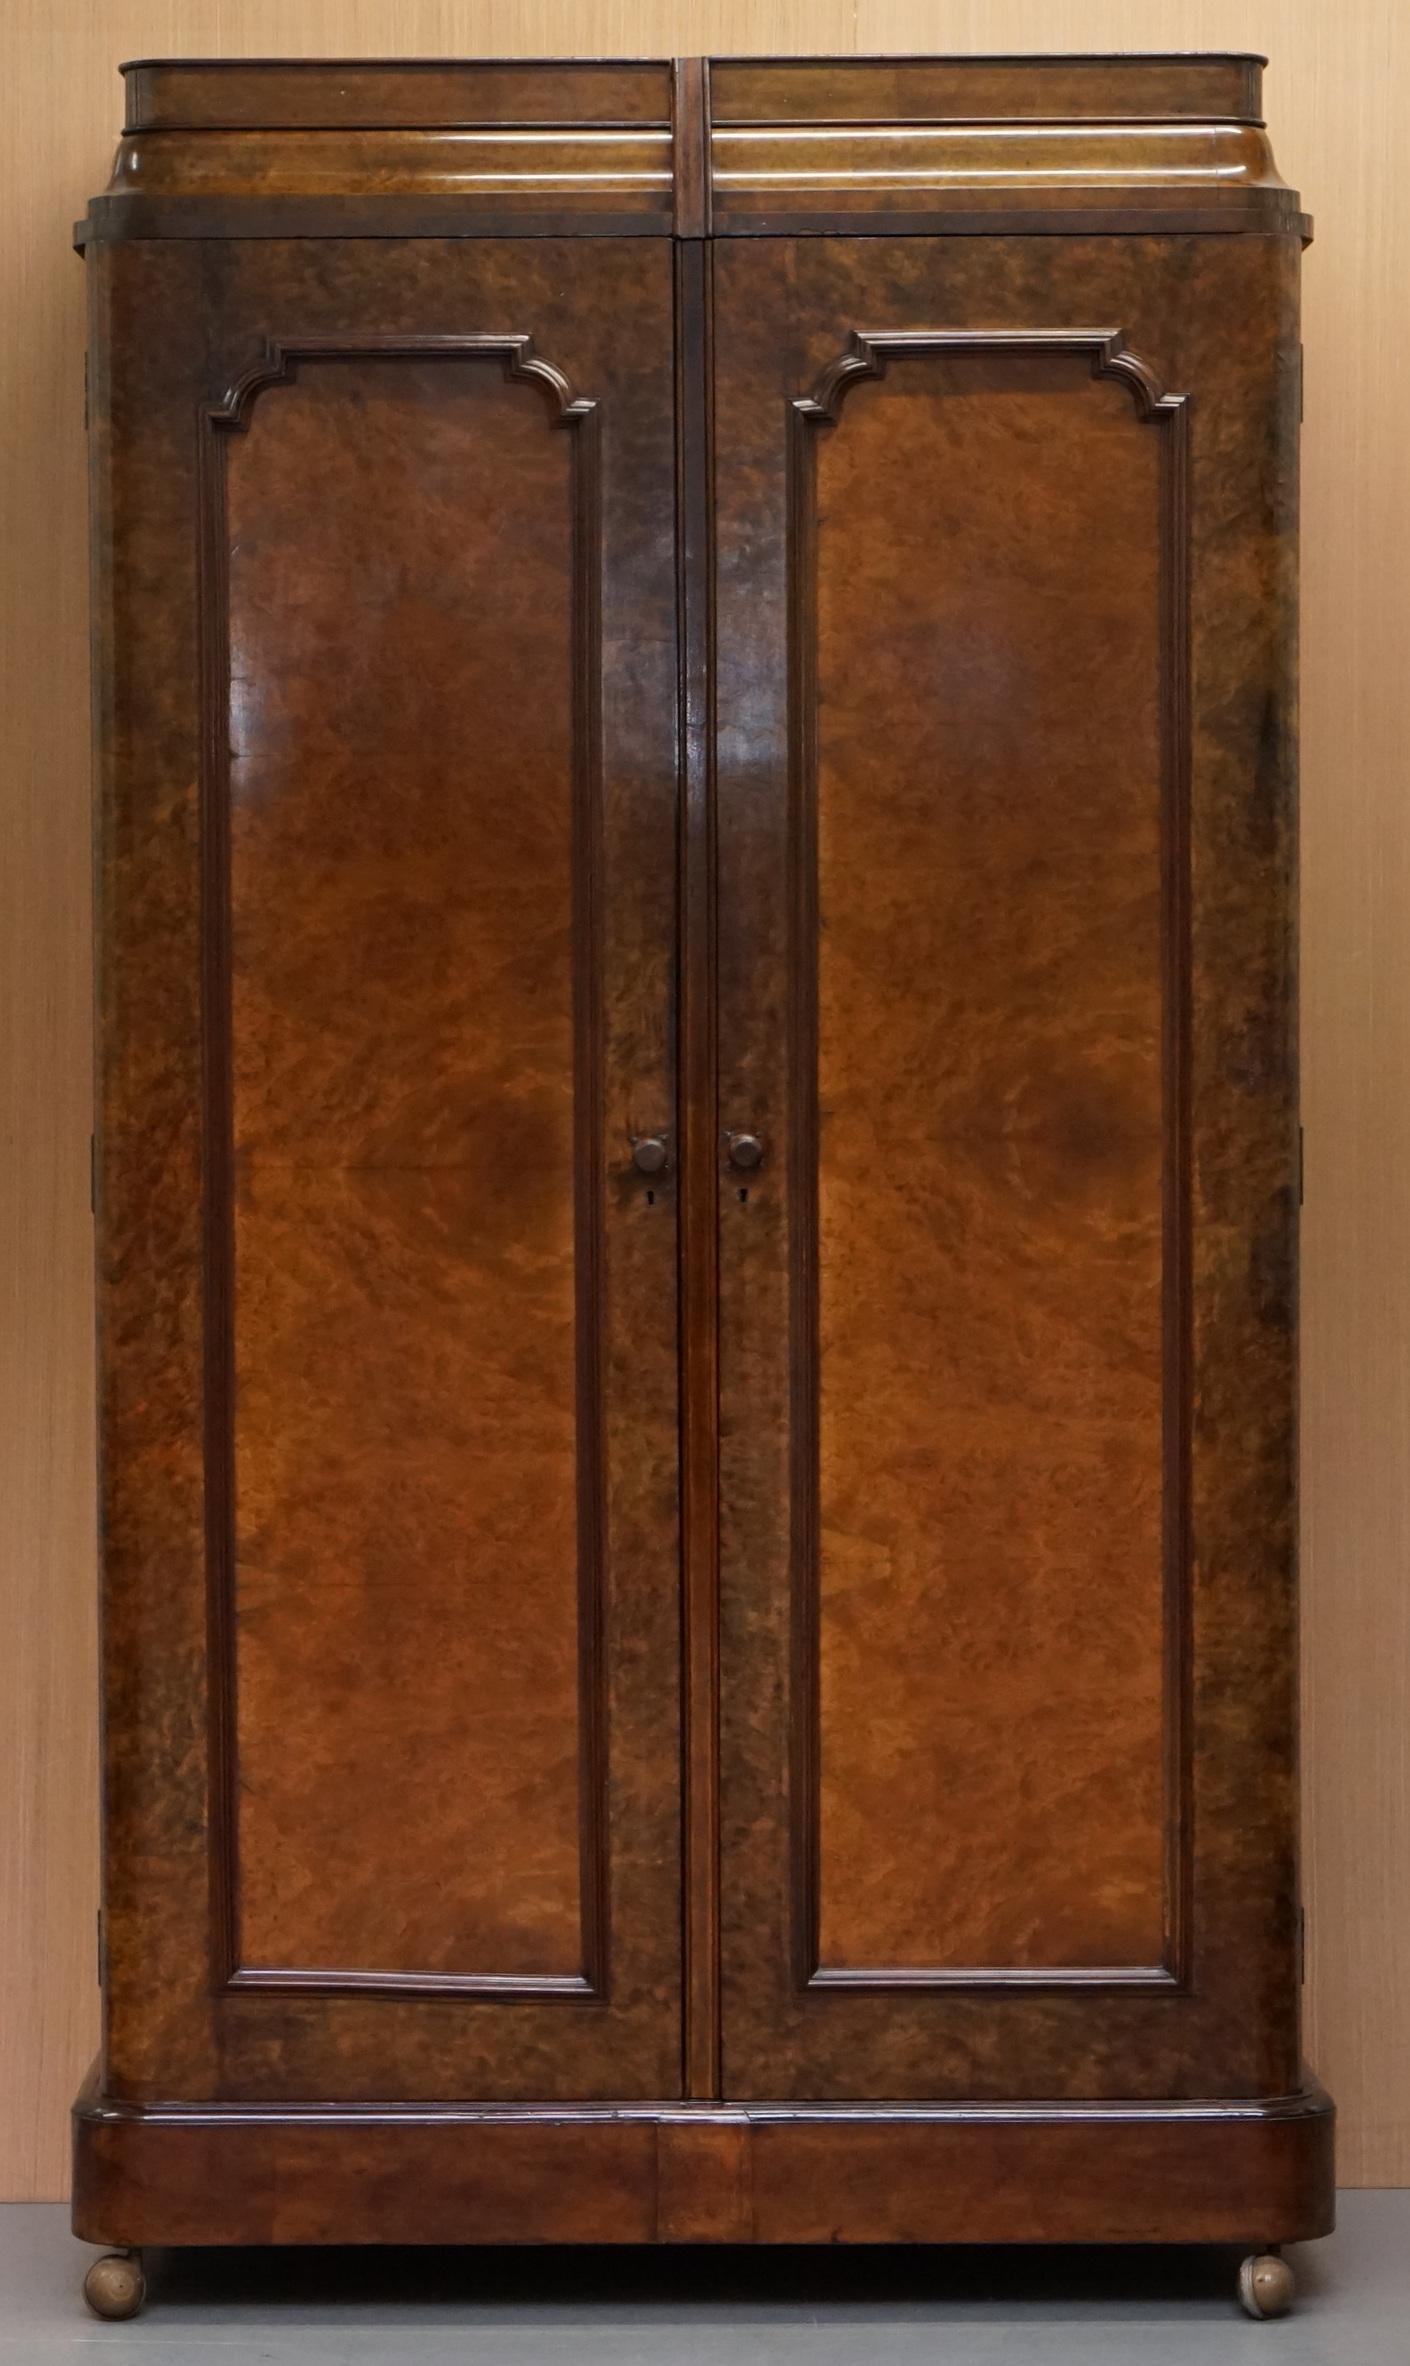 We are delighted to offer for sale this absolutely stunning circa 1890 Victorian Burr walnut wardrobe with drawers from the great company of Collinge’s Burnley

This is part of a suite, the full set includes a stunning dressing table, pair of side